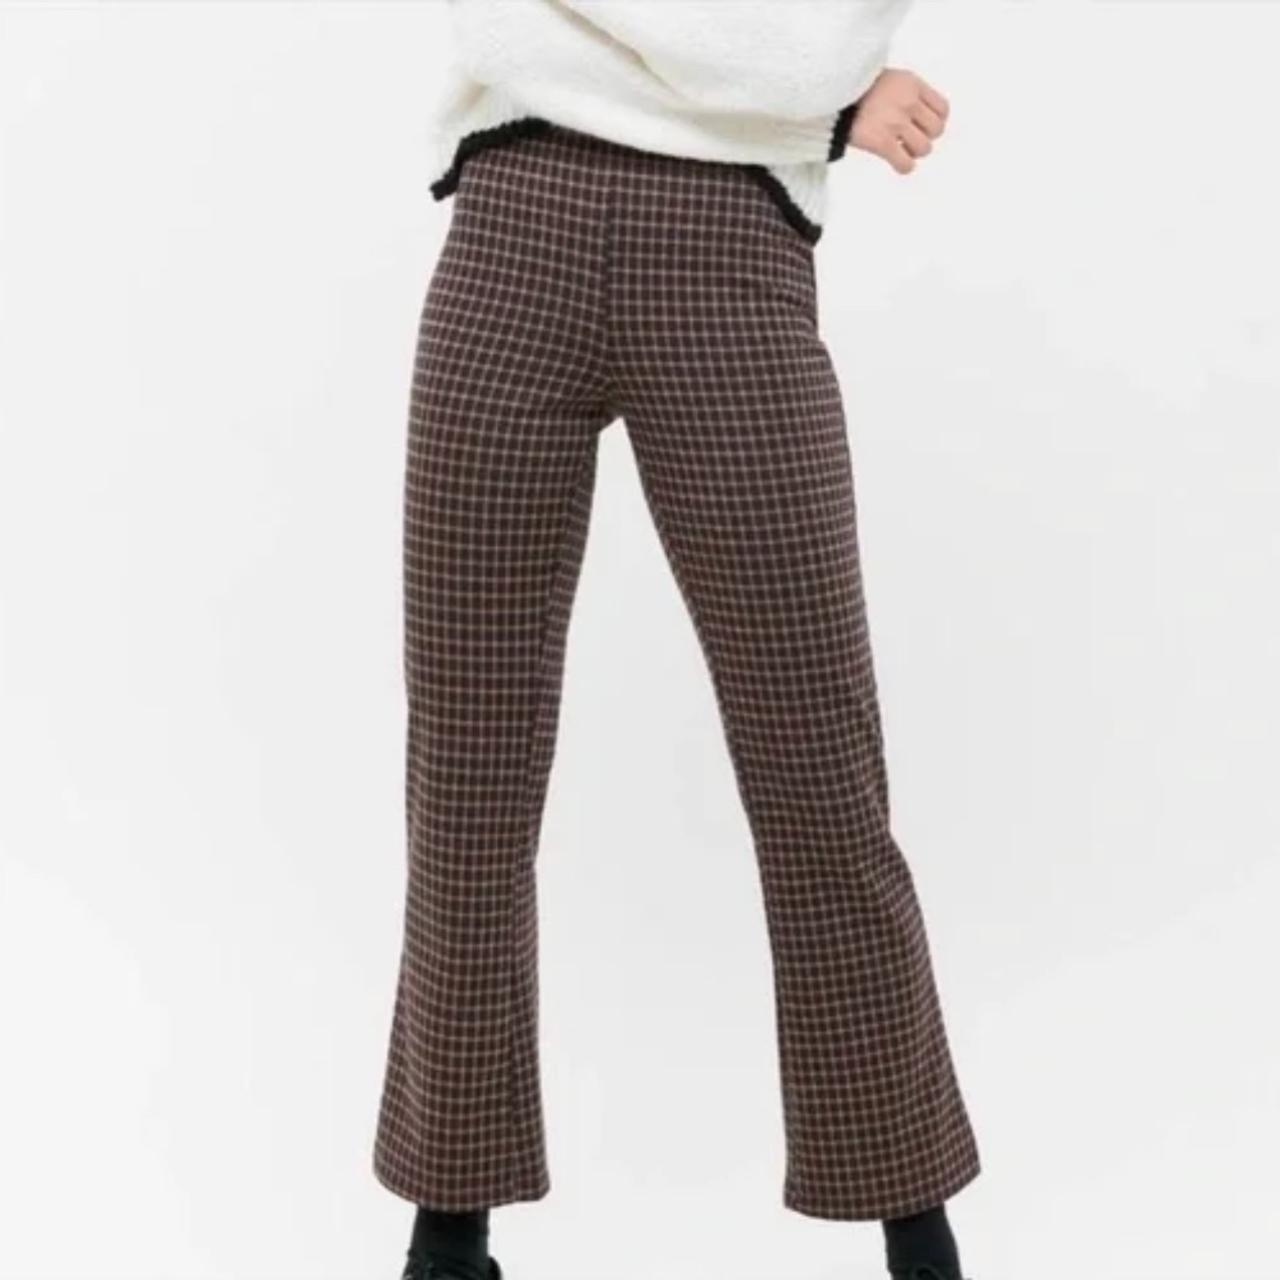 Urban Outfitters Uo Casey Kick Flare Pant in Black